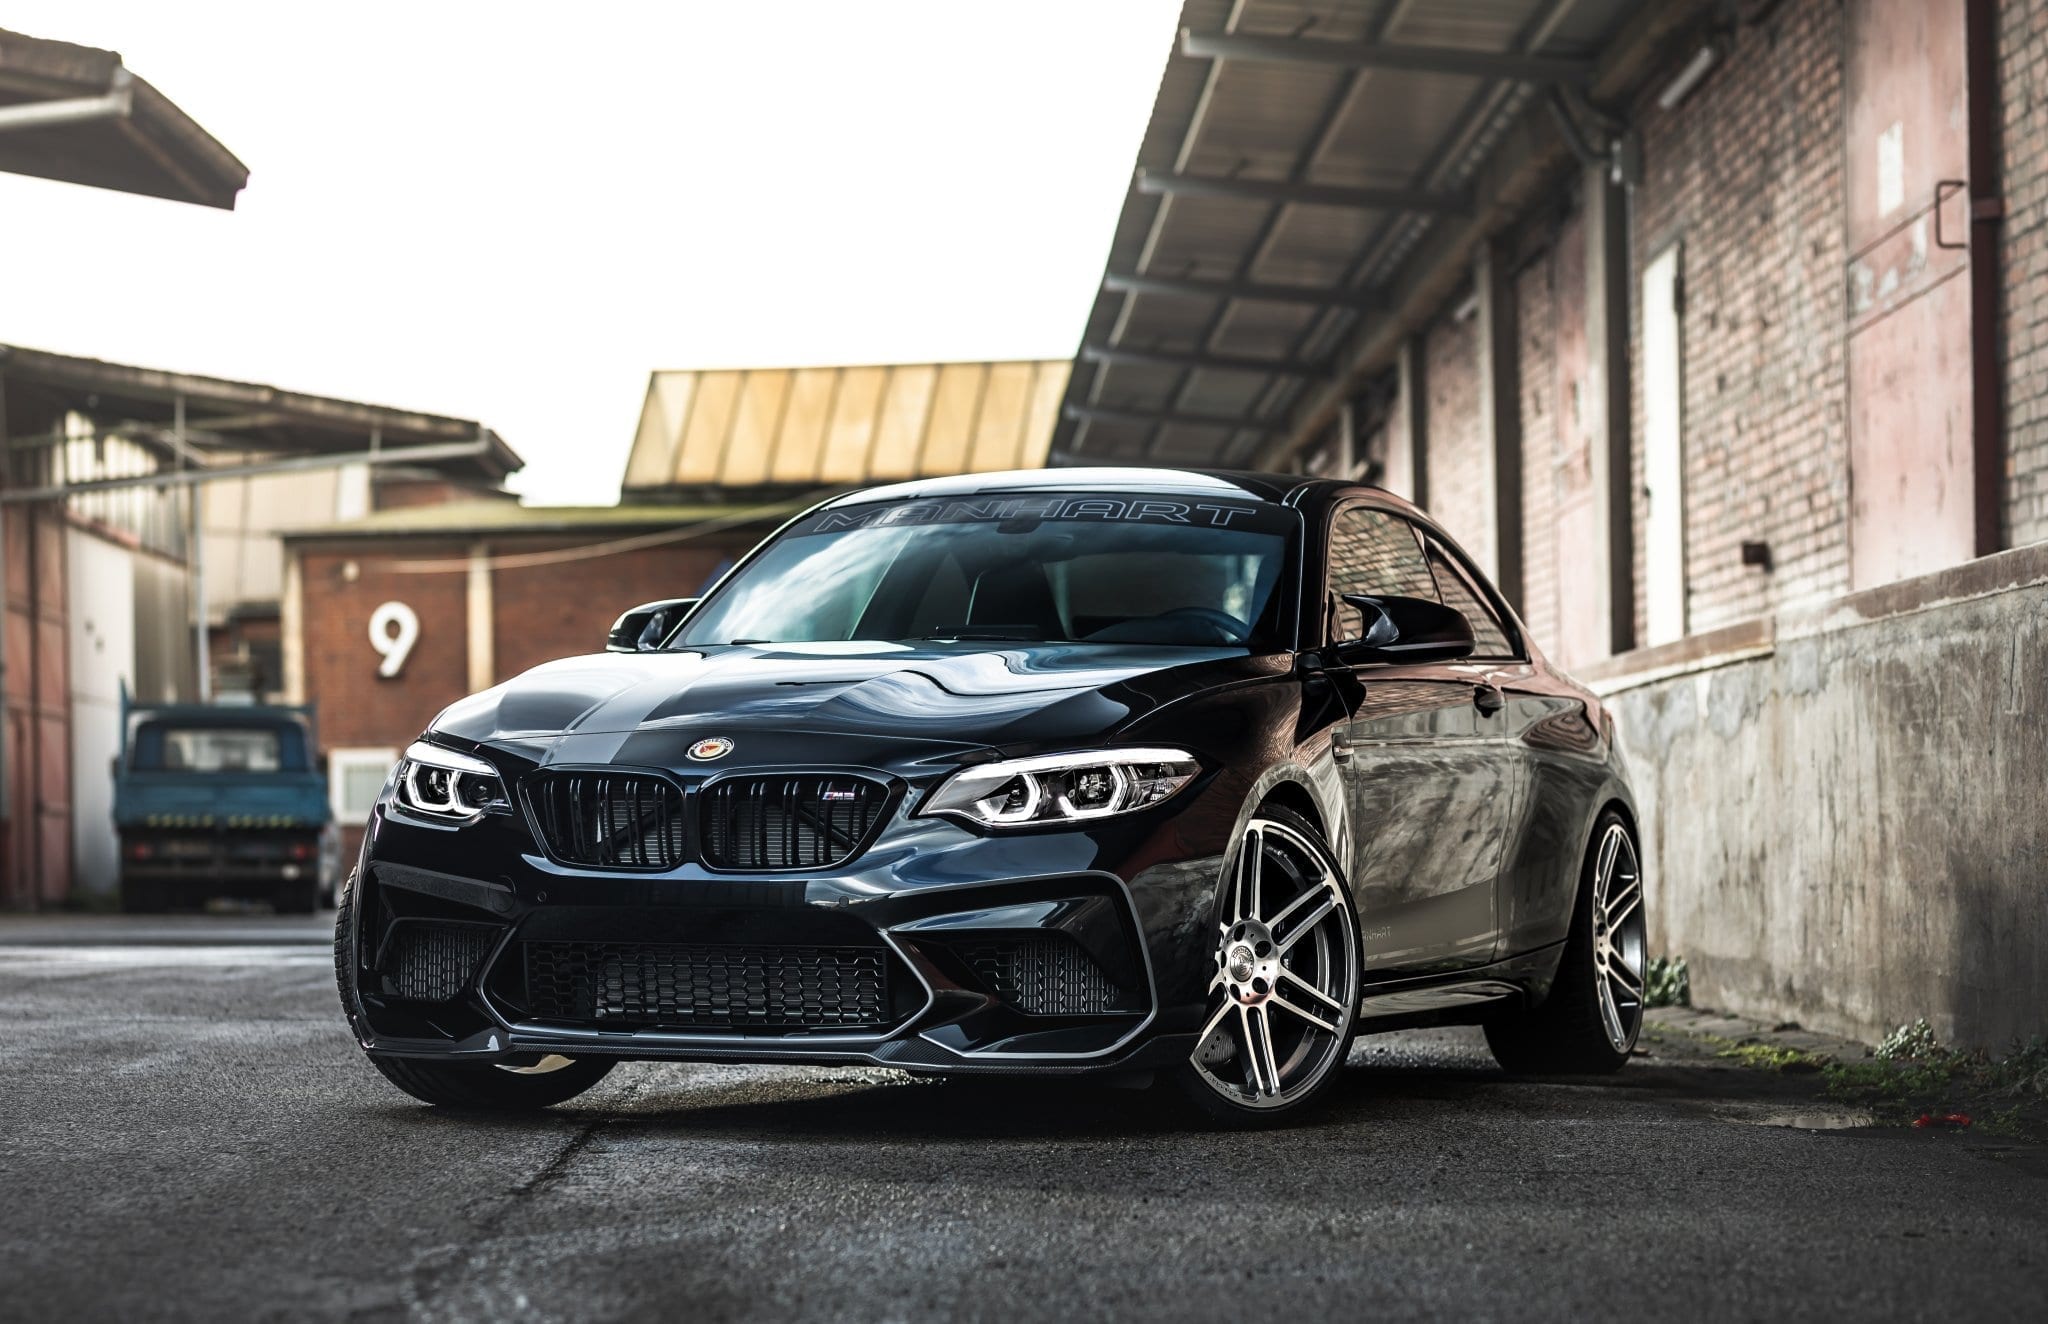 https://s1.cdn.autoevolution.com/images/news/manharts-mh2-500-tuning-package-takes-the-bmw-m2-competition-to-a-new-level-161372_1.jpg